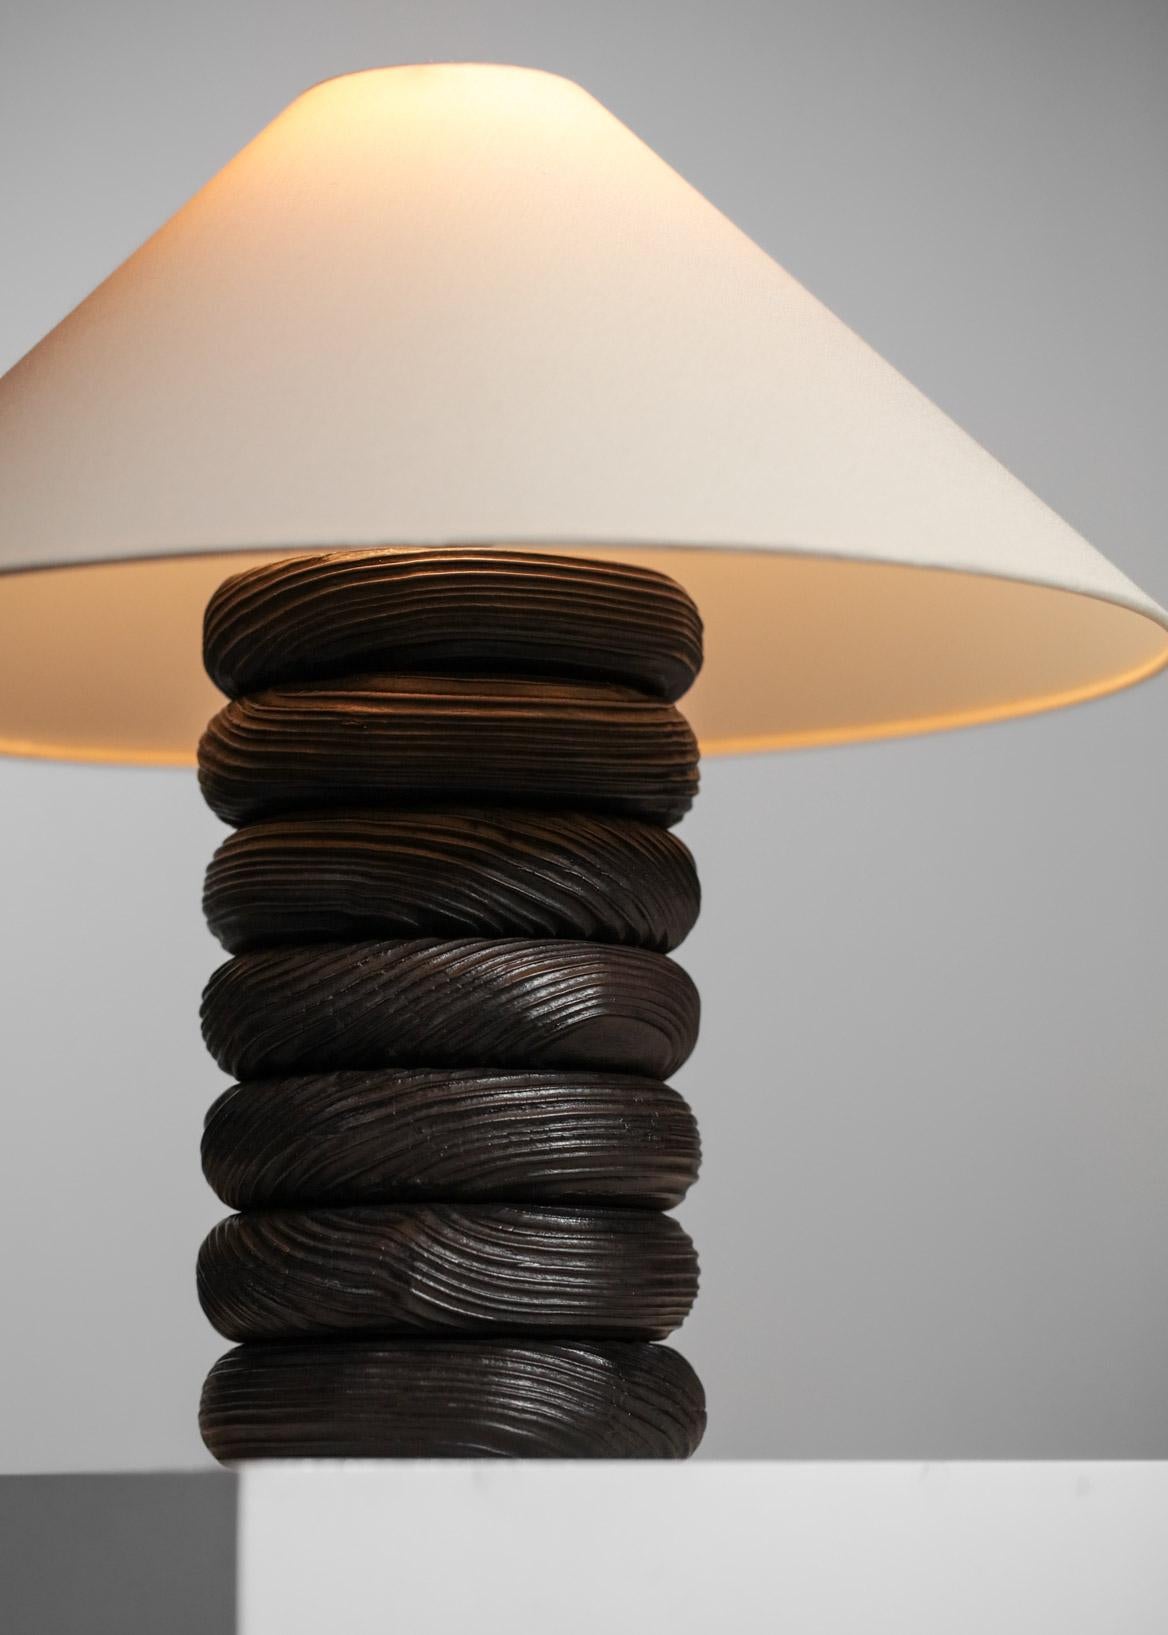 solid wood table lamp